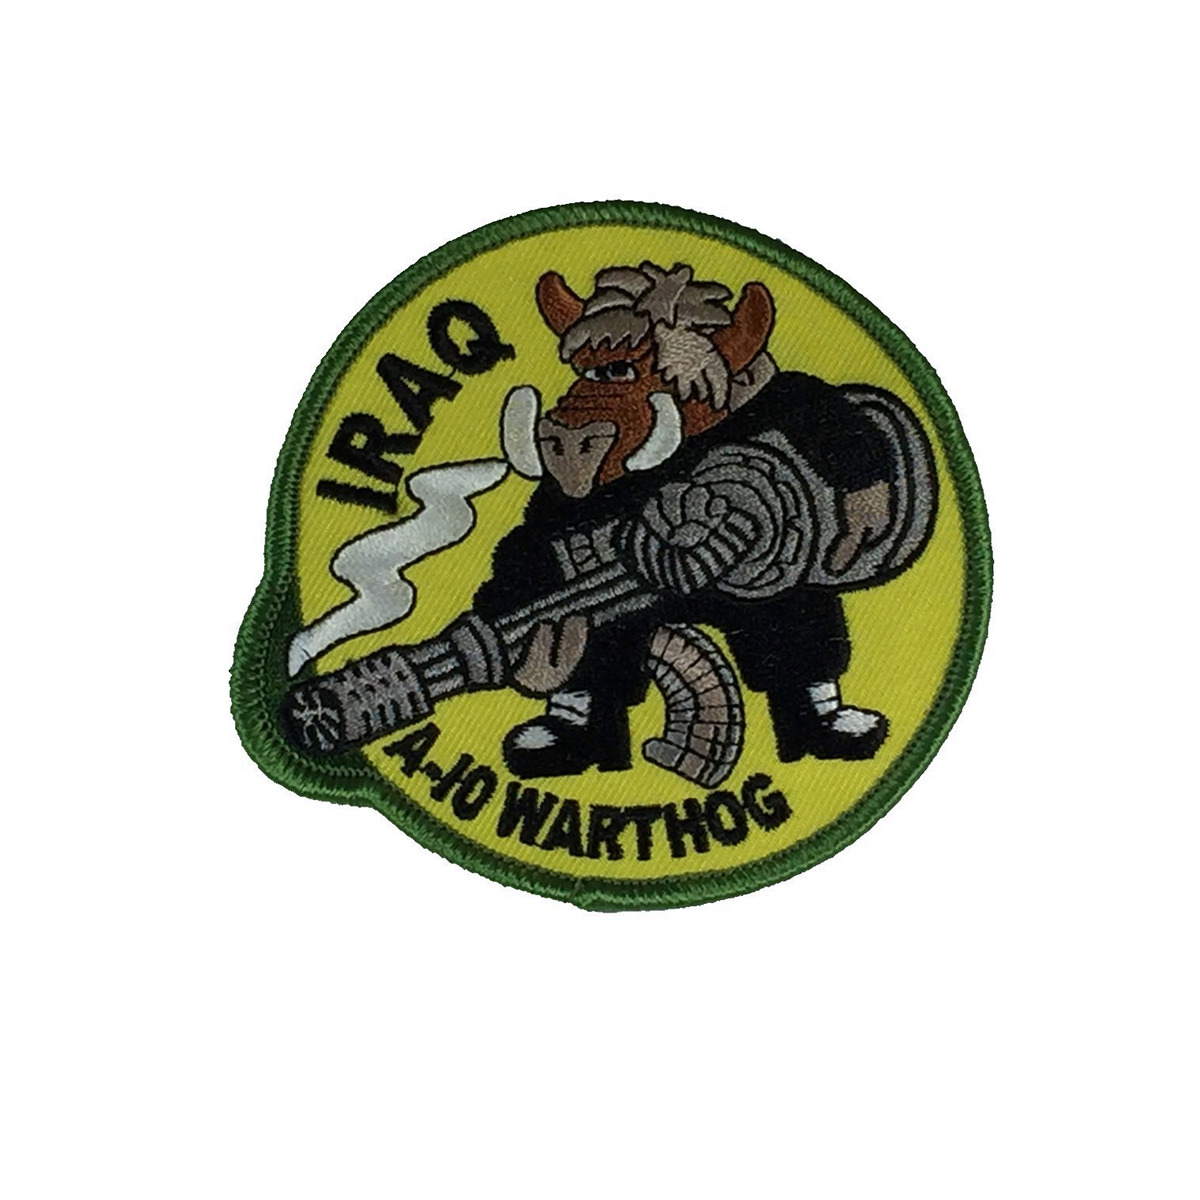 IRAQ A-10 WARTHOG ROUND PATCH - Color - Veteran Owned Business.